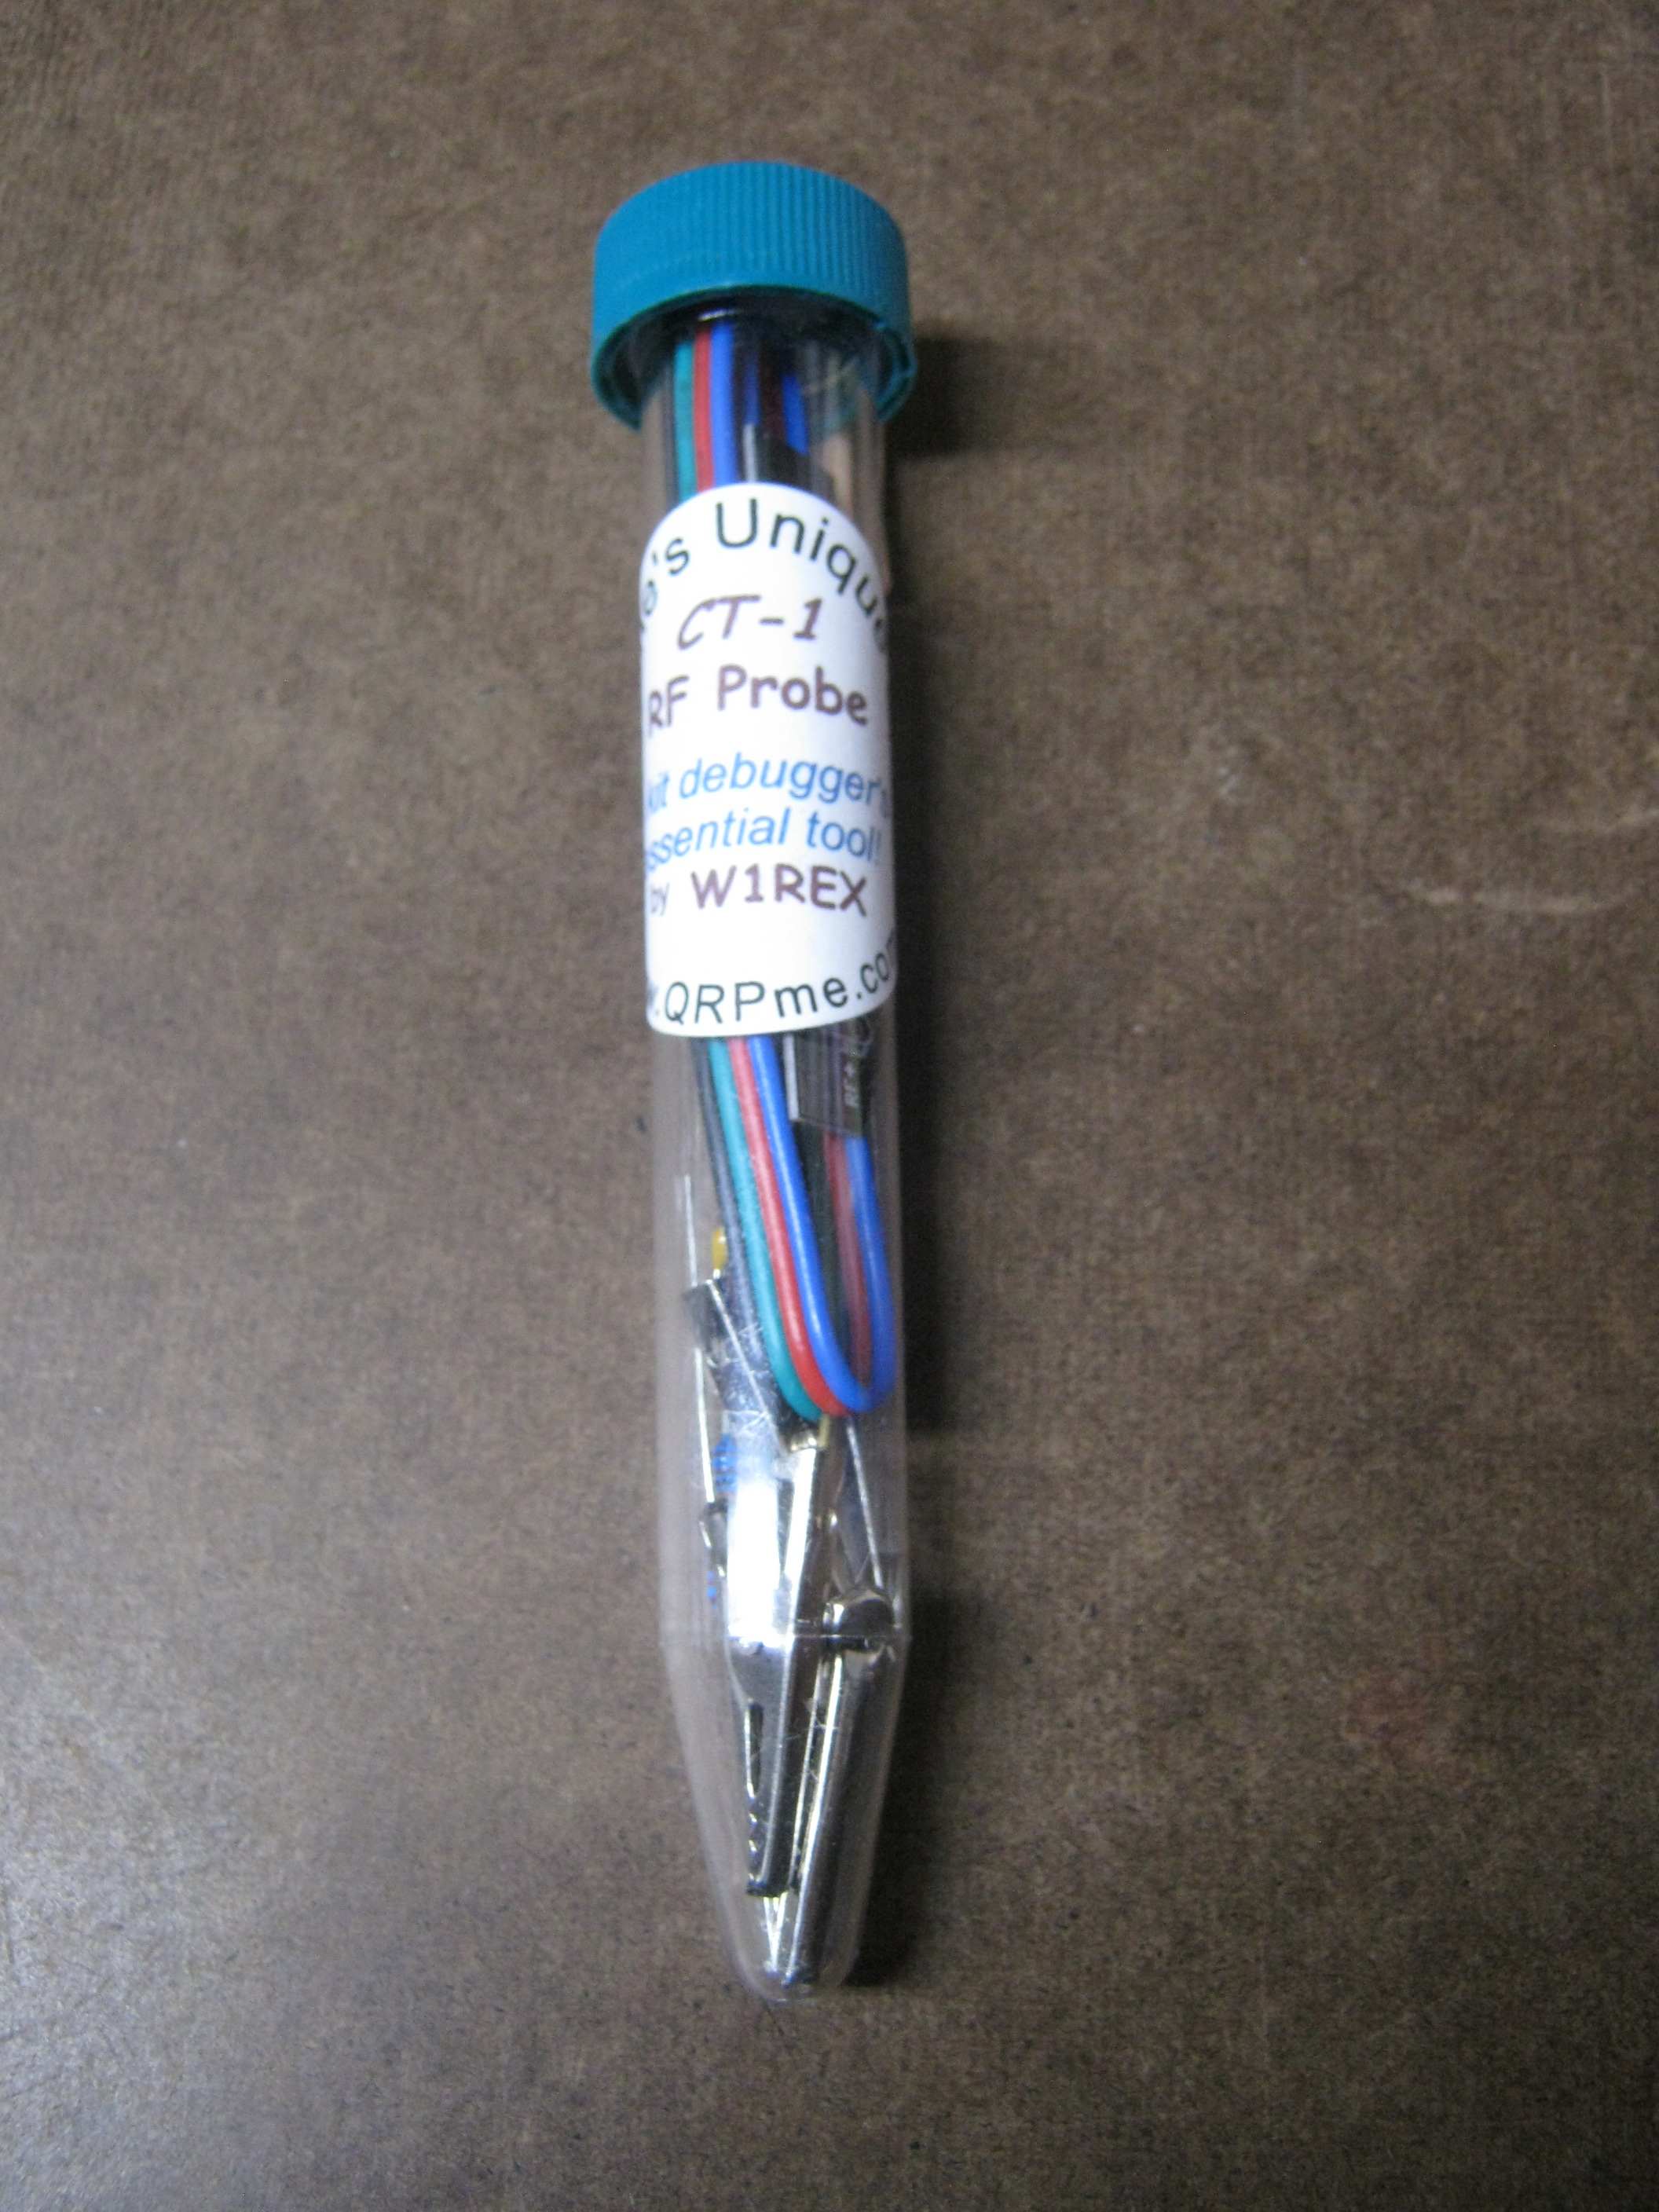 Picture of CT-1 RF Probe kit in a test tube*